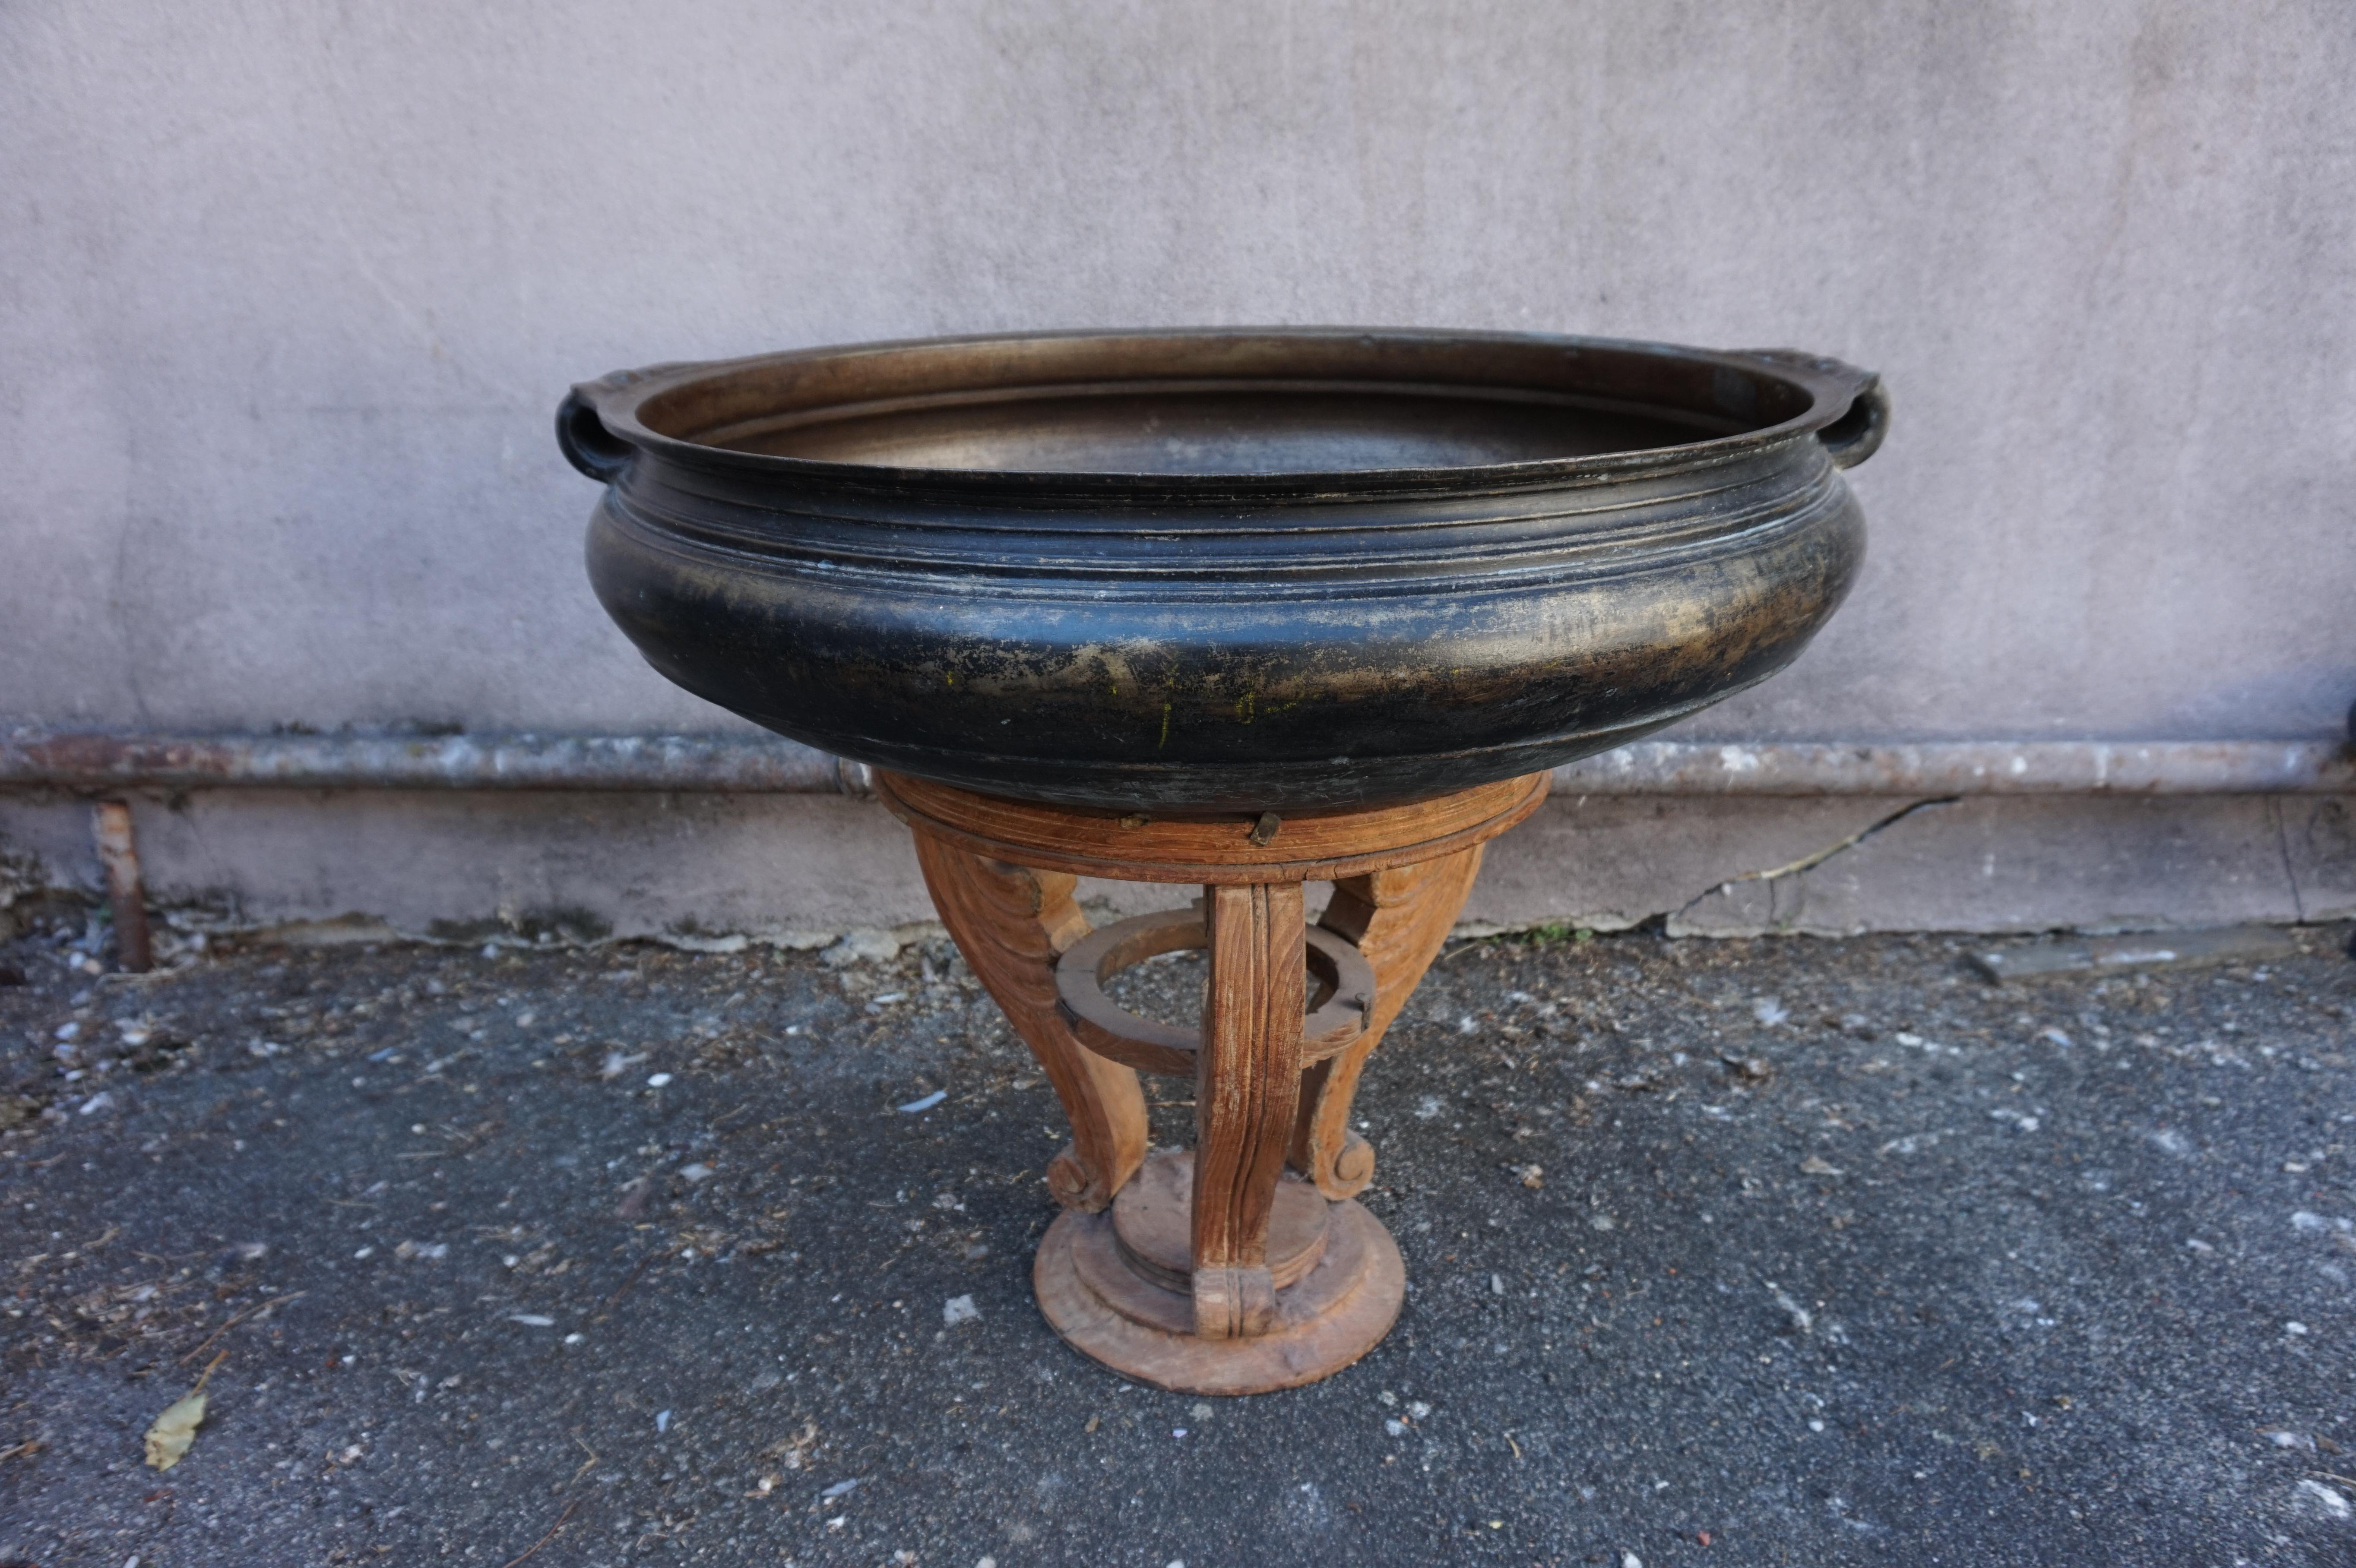 Large cast bronze vessel originally used as a ceremonial cooking urn. This specific piece was beautifully cast with turned rings and moulded handles. It also features original patina and that really adds to it's appeal. Fill with floating flowers as